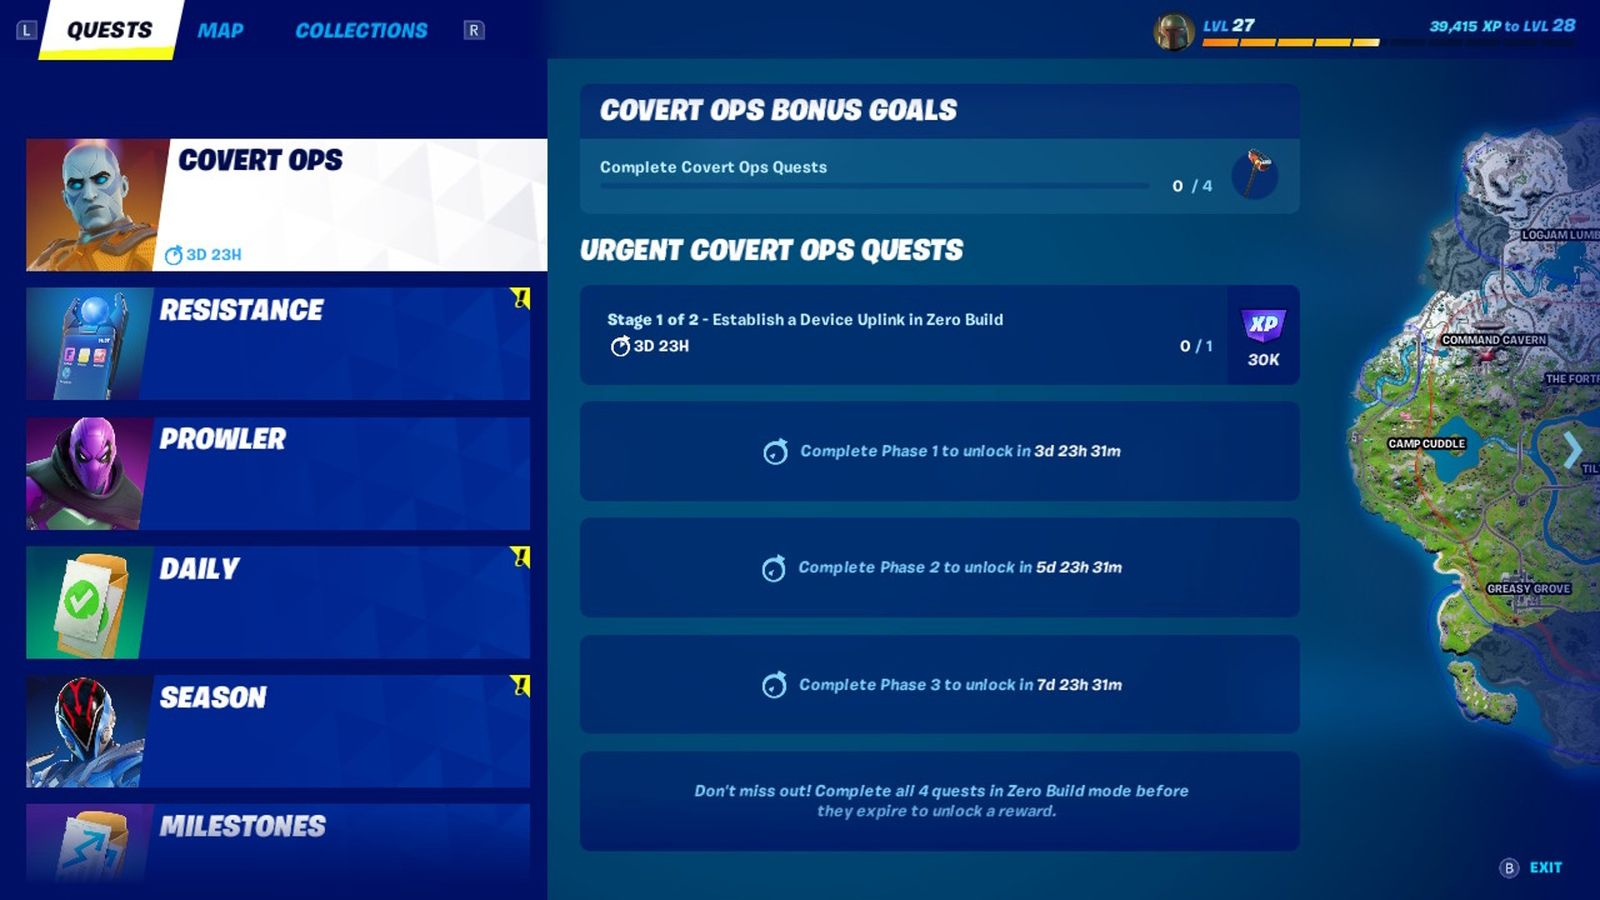 Image of the current Covert Ops objectives in Fortnite.